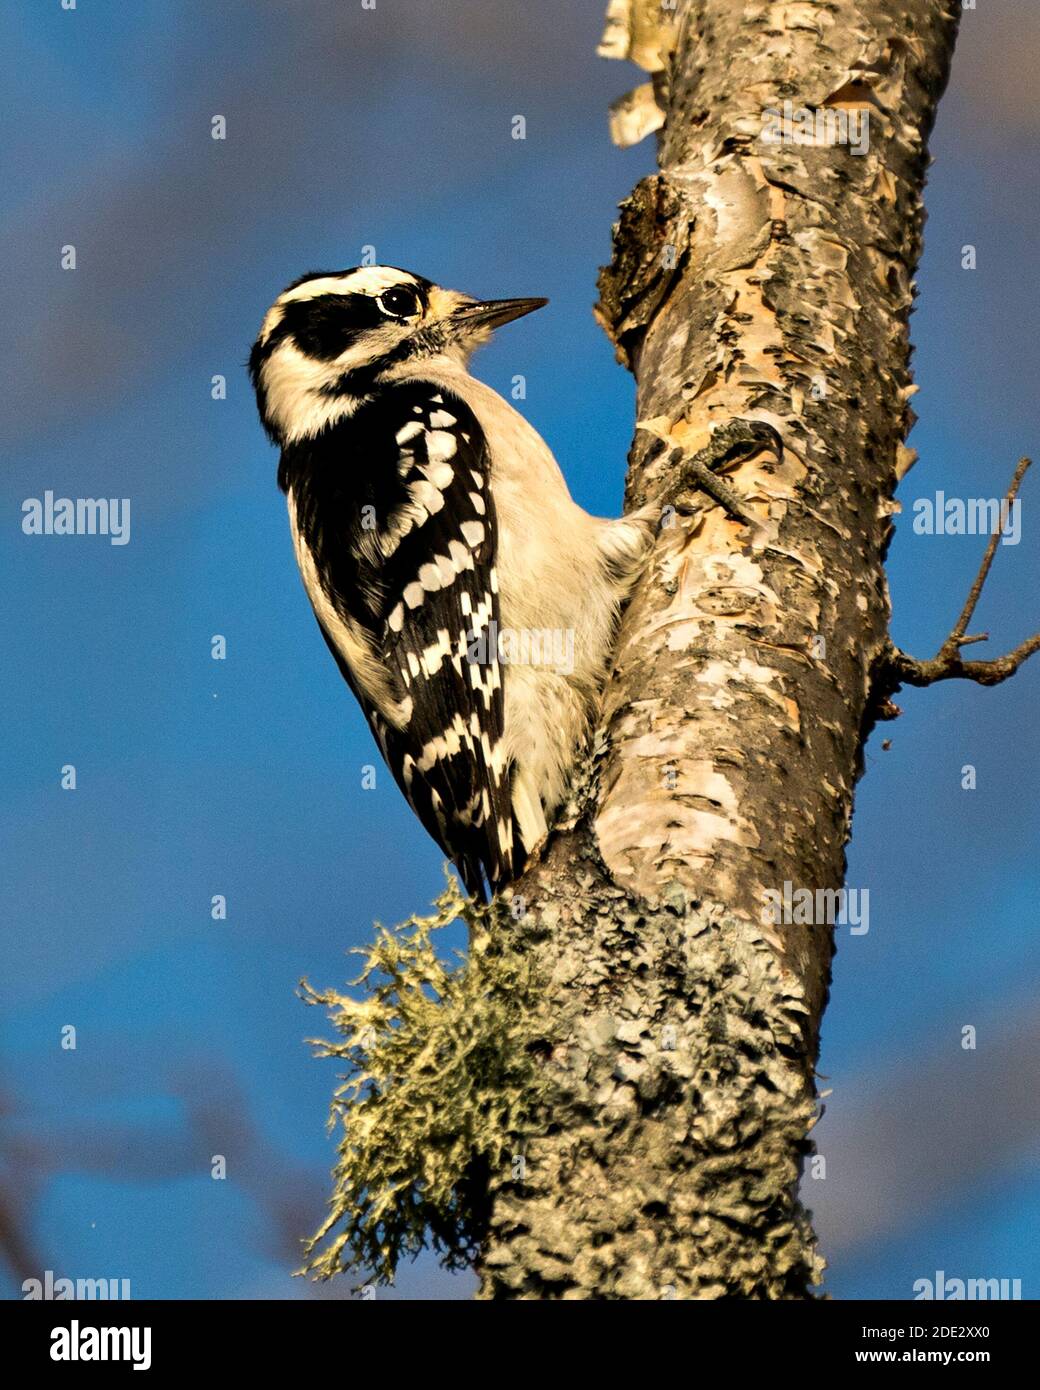 Woodpecker close up profile view on a yellow birch tree trunk with a blue sky blur background in its environment and habitat displaying feathers. Stock Photo